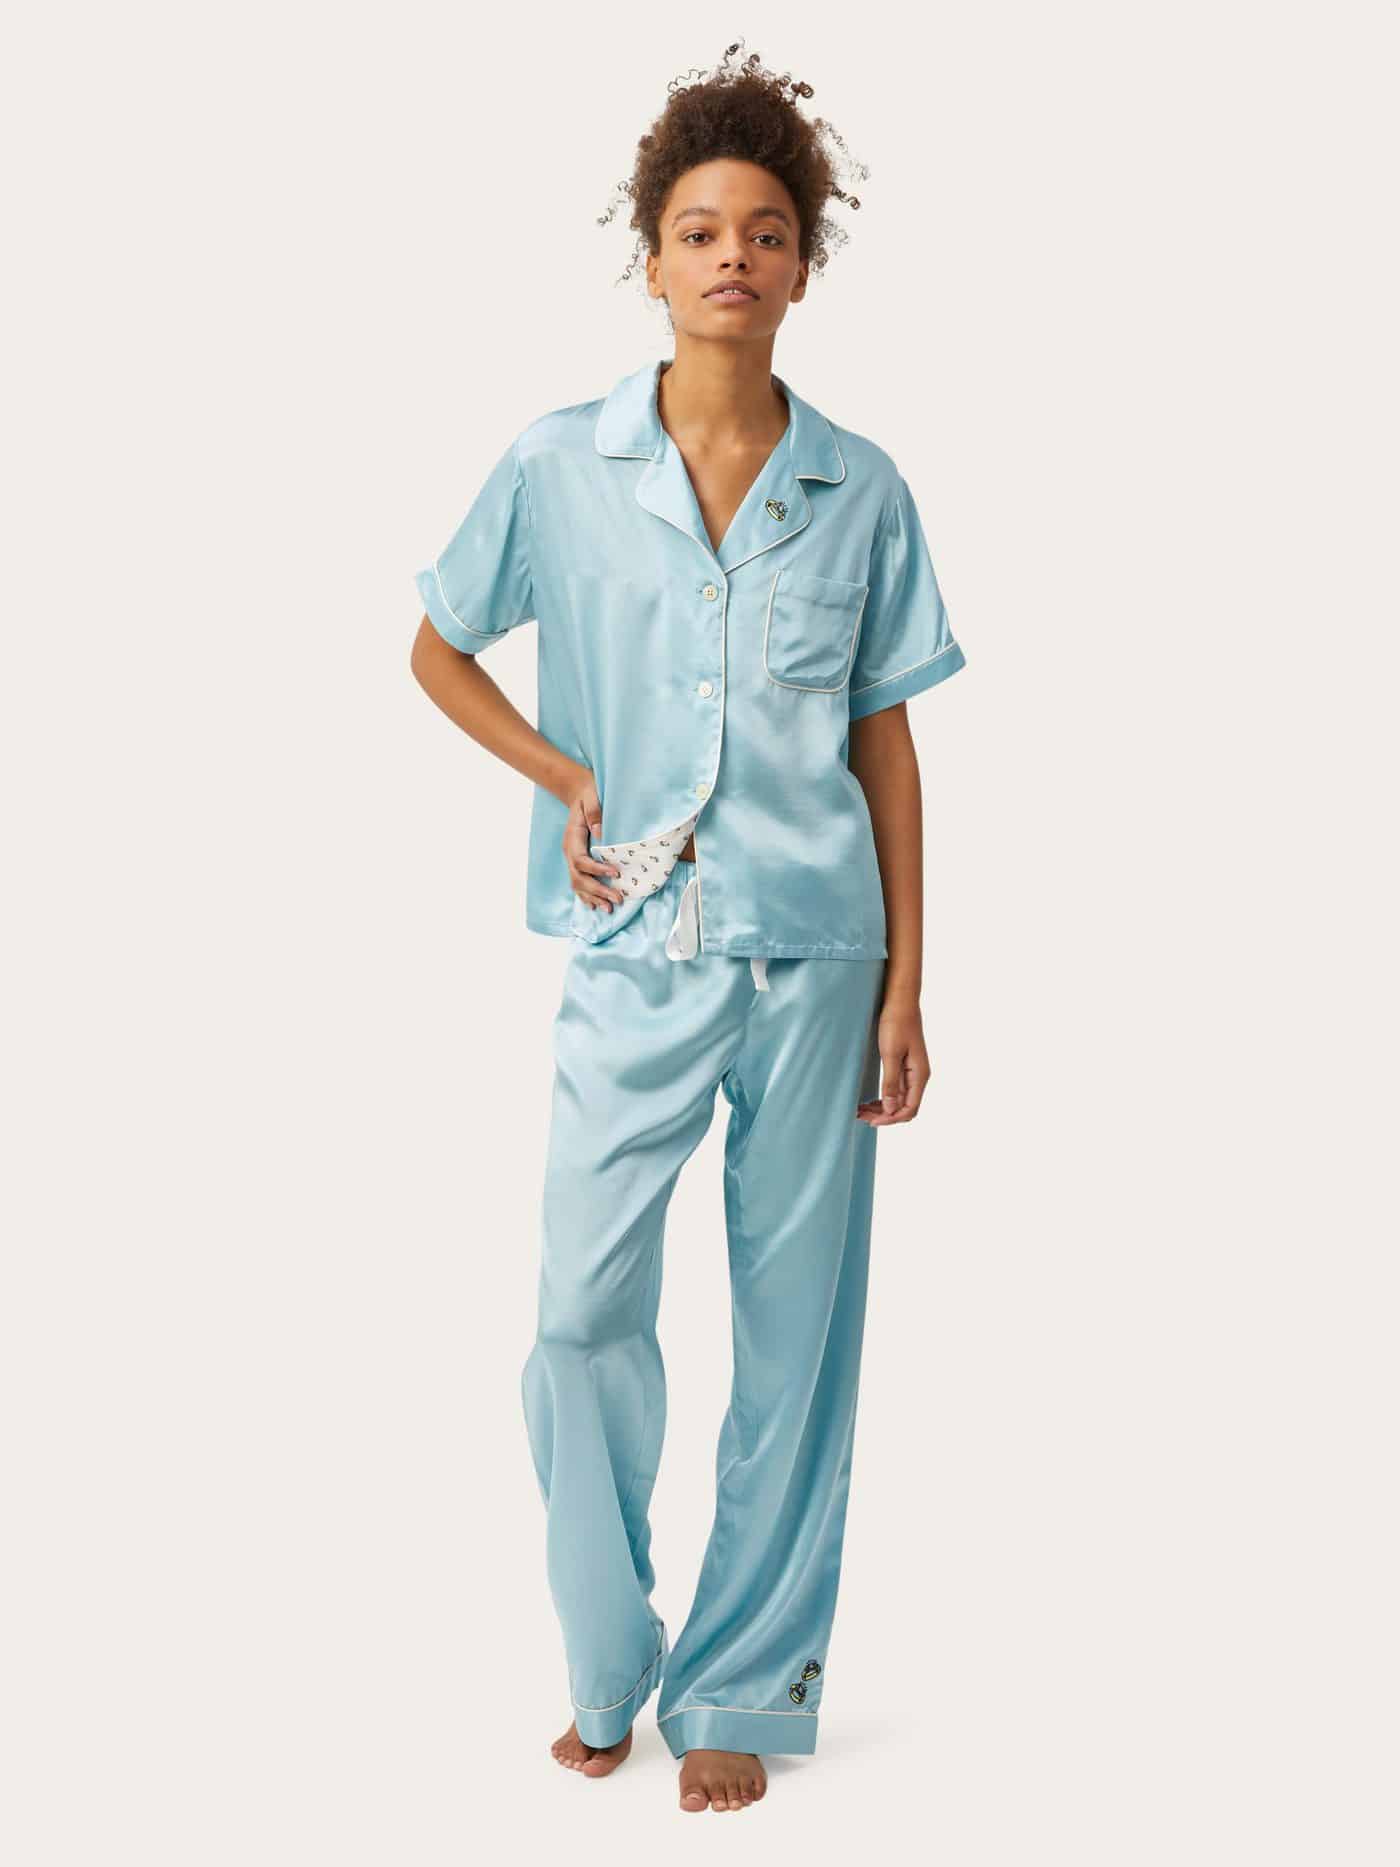 Morgan Lane Teams Up With Monopoly For Wishlist-worthy Silk Sleepwear  Collection - Daily Front Row